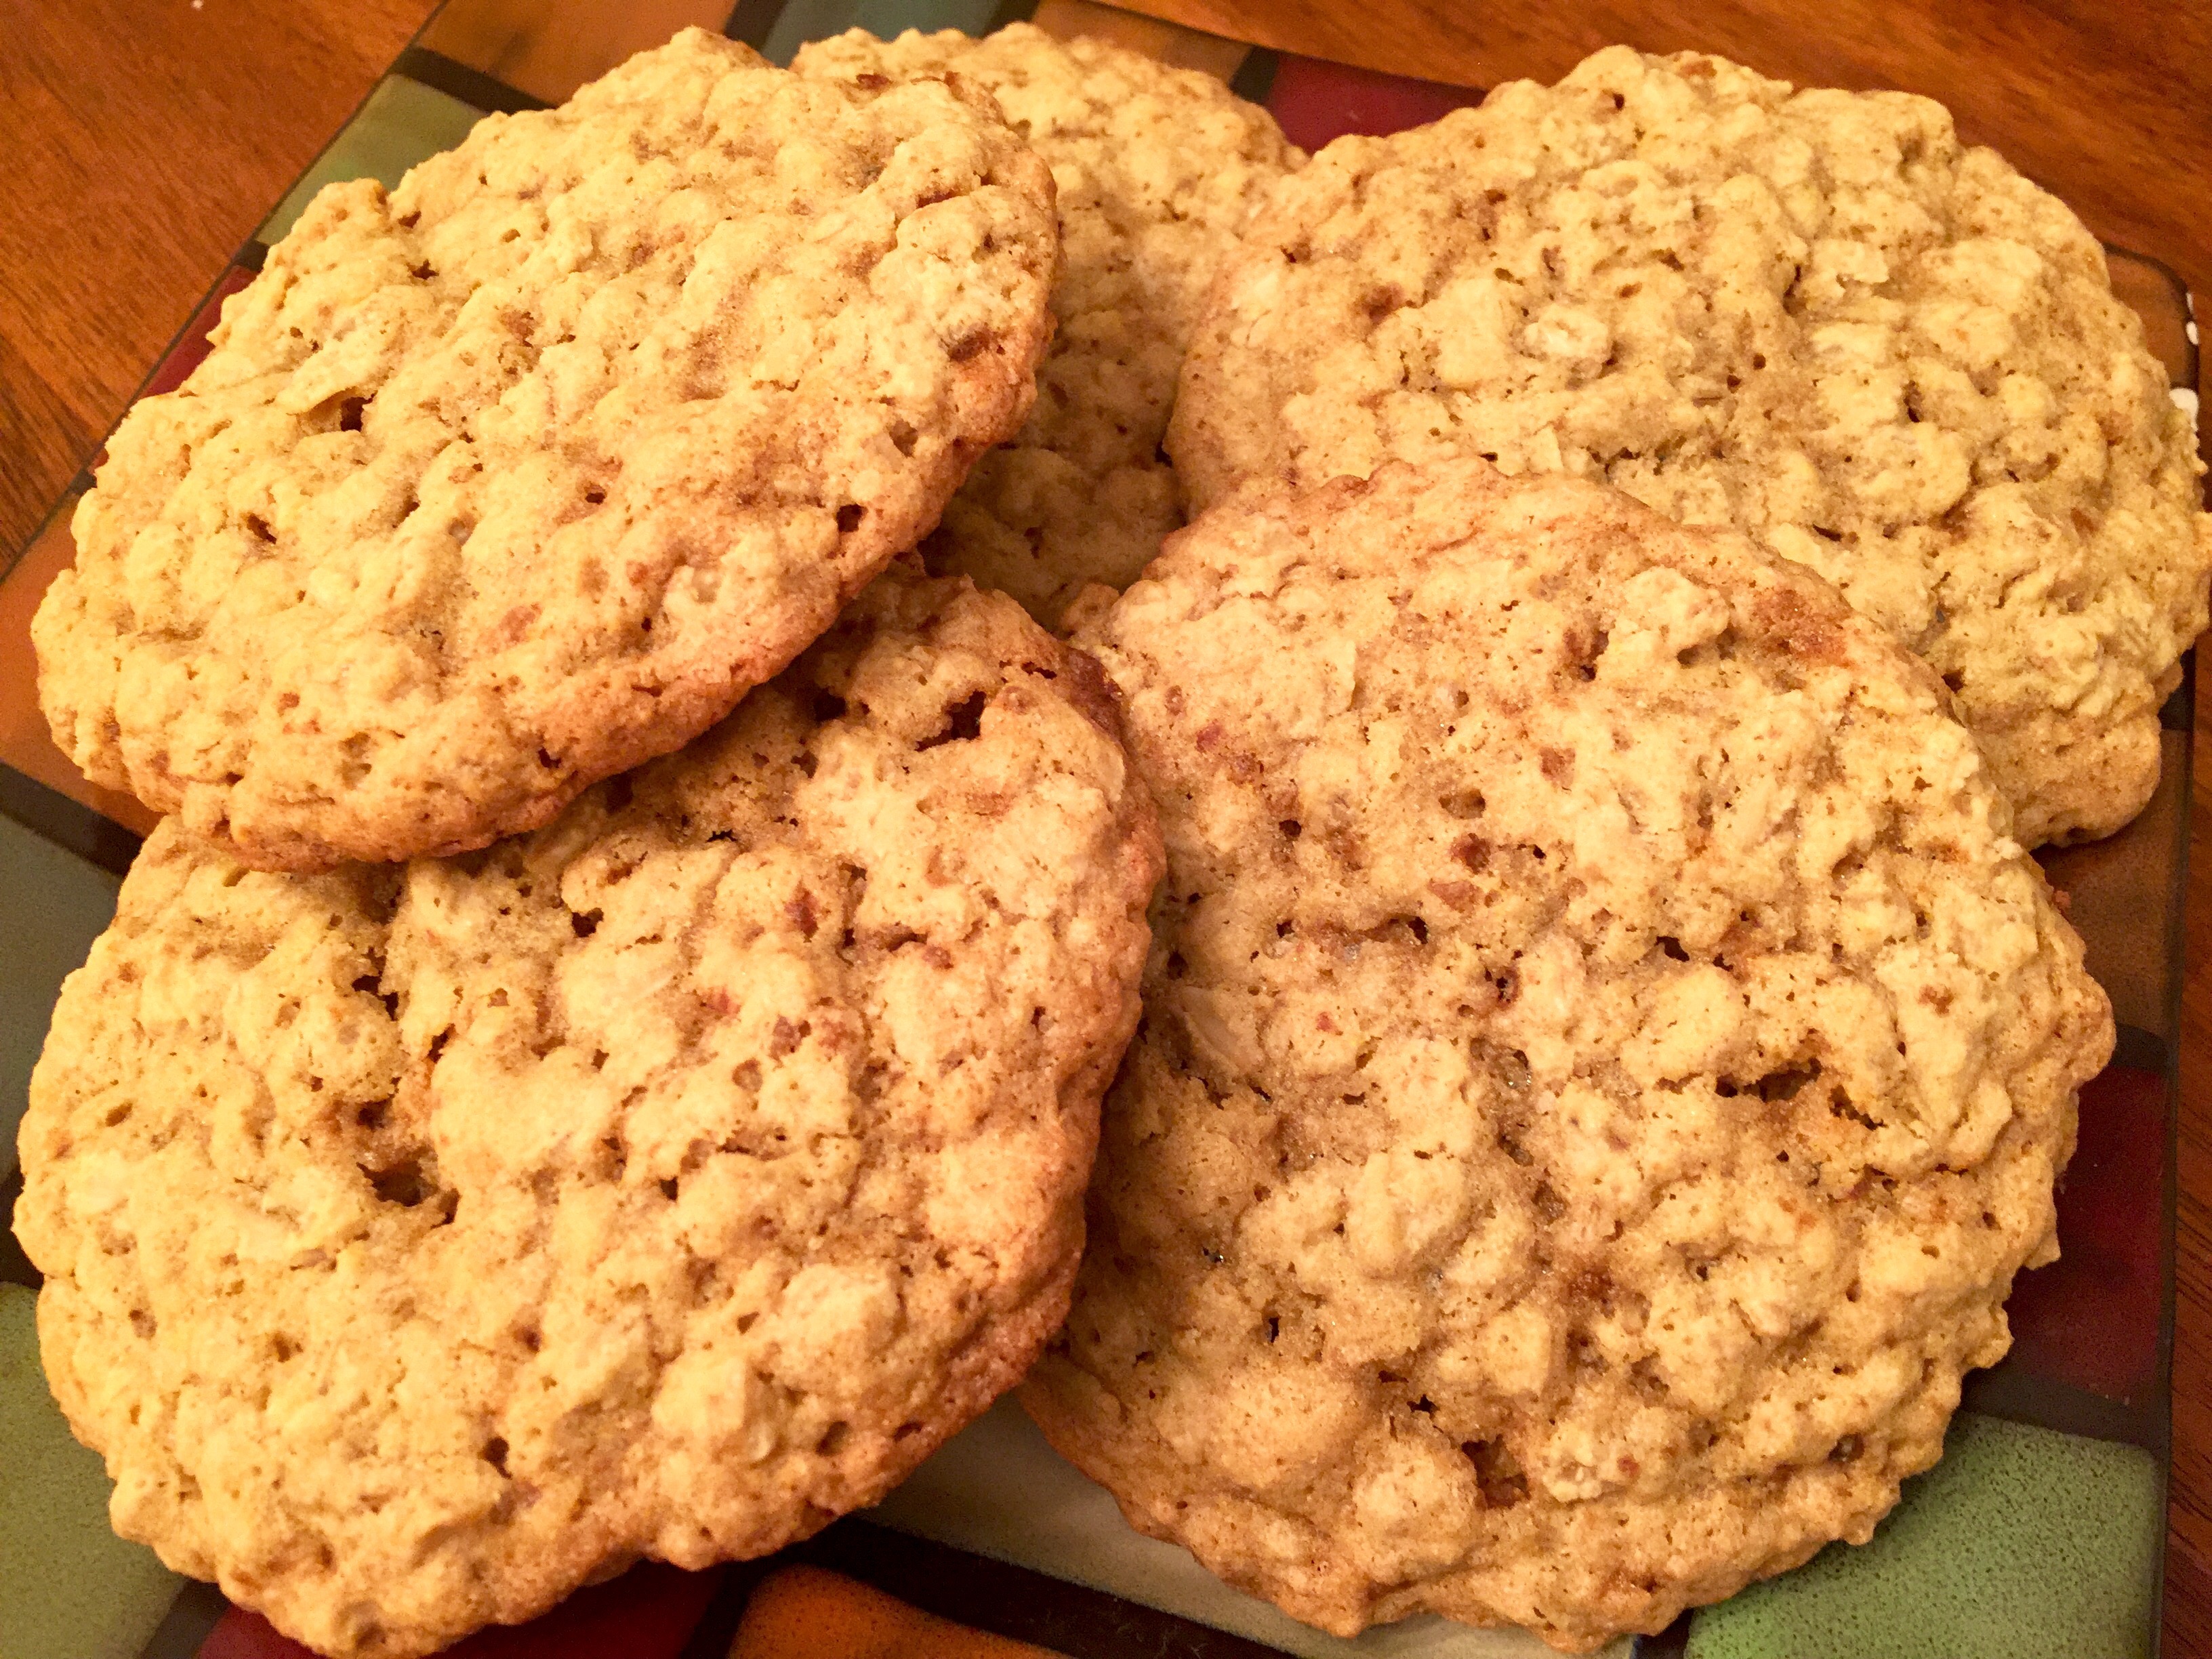 Classic chewy gluten free oatmeal cookie recipe ... quite possibly better than the original!